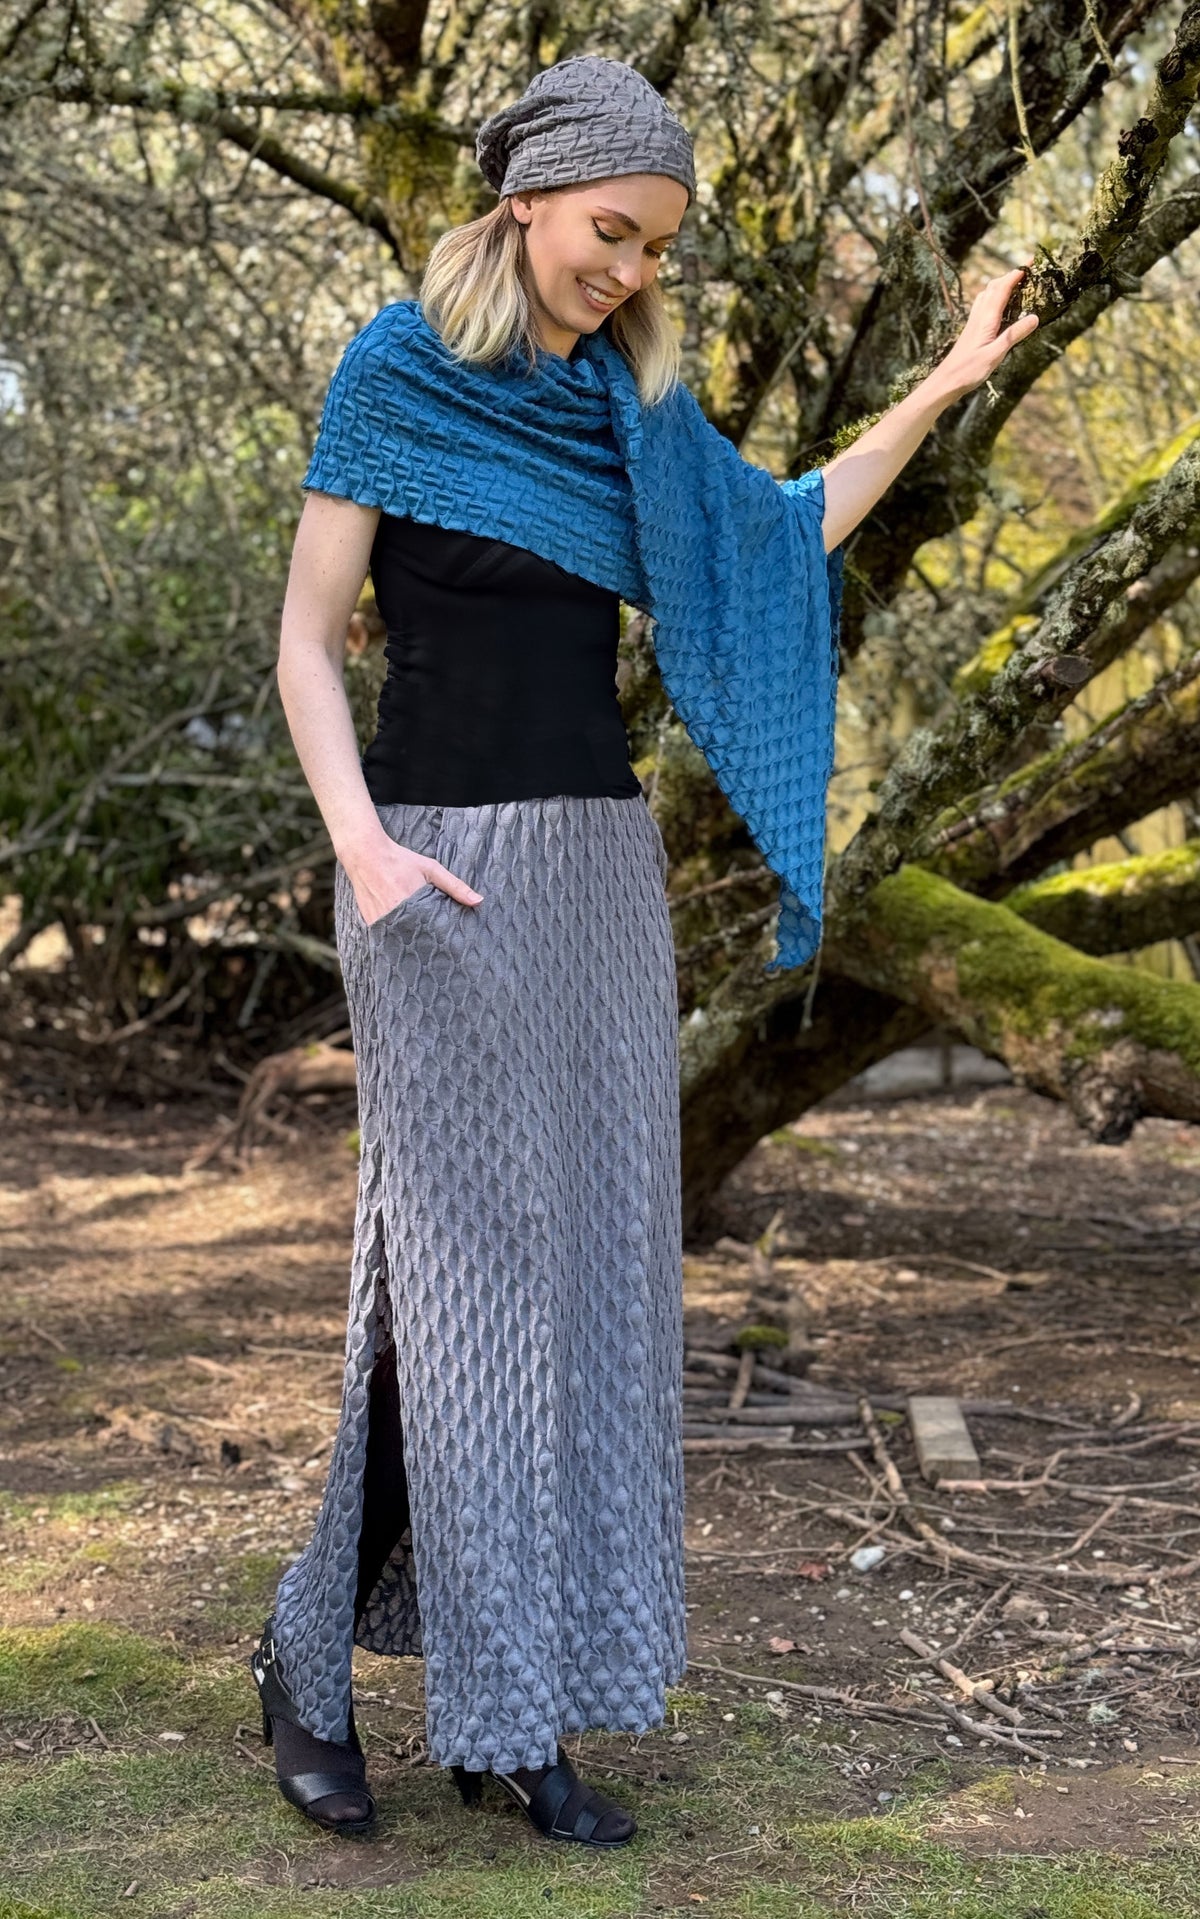 Model photo of A-Line Skirt and rowdie Hat in Gray Fractal, Handkerchief Scarf in Cerulean Blue from the LYC/Pandemonium Seattle Fractal Collection. Handmade in Seattle, WA, USA.